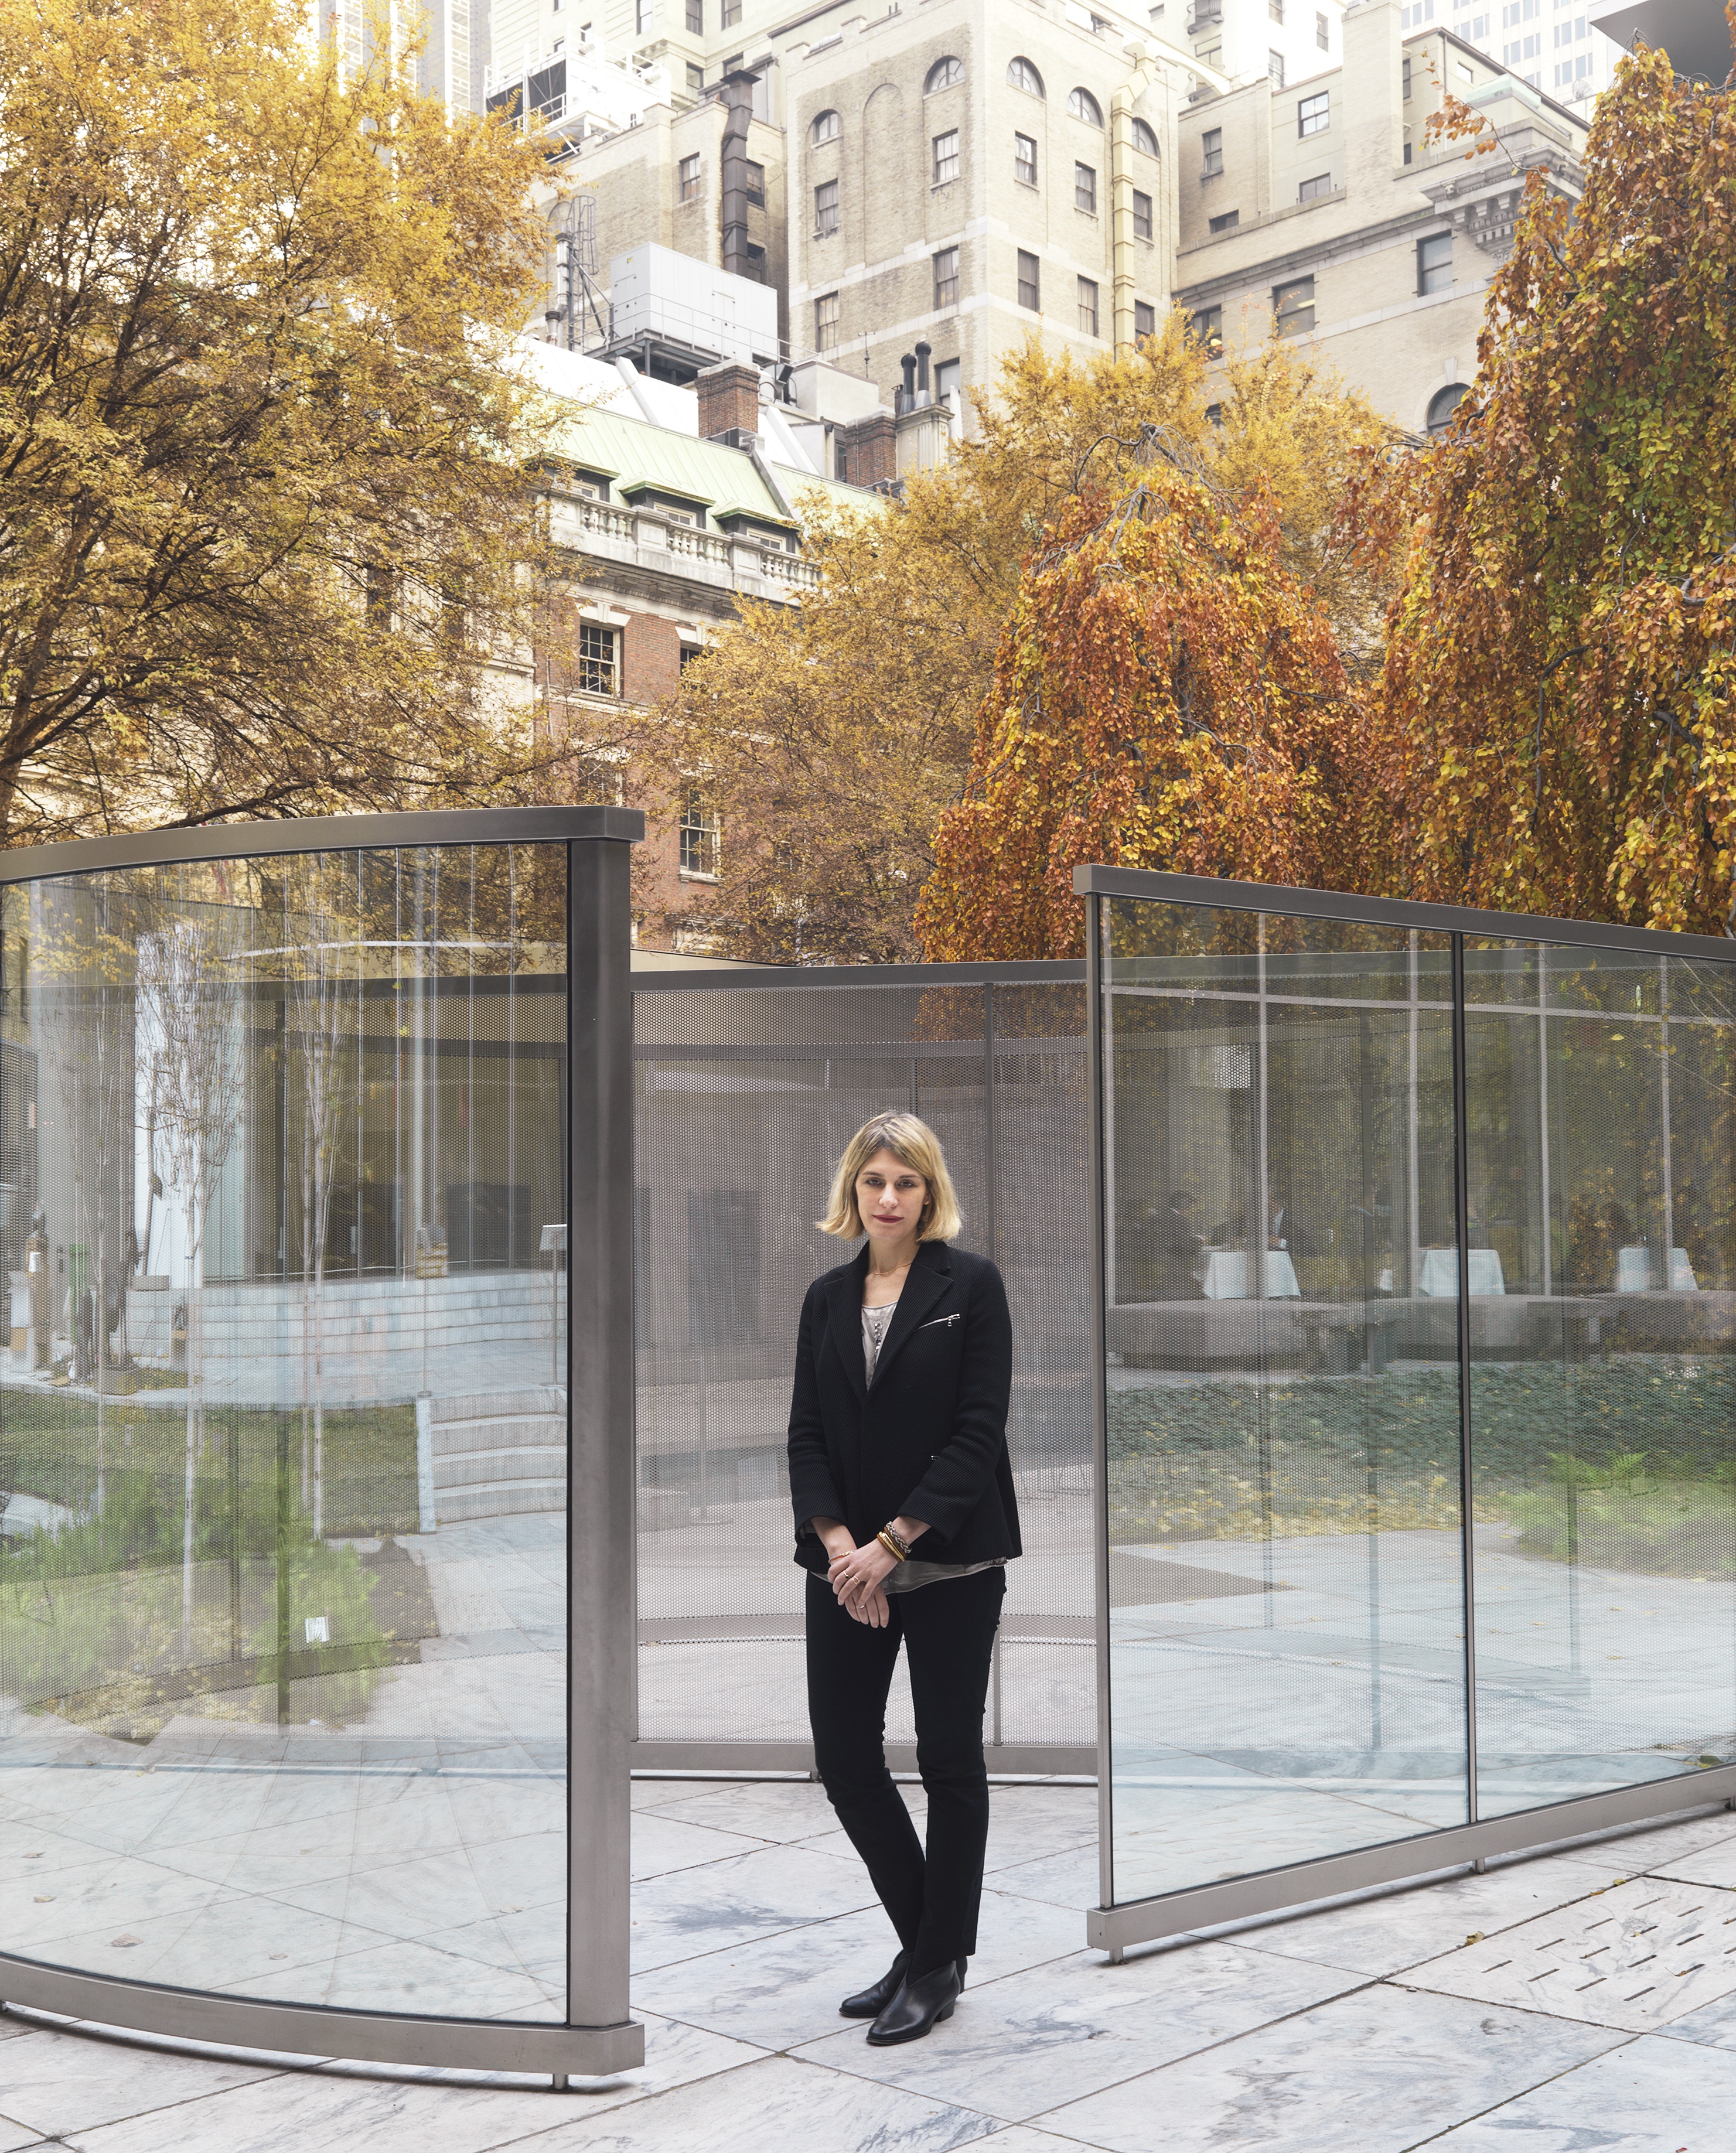 Janevski stands with the mirrored glass and perforated steel of Dan Graham's Child's Play, 2015–16 in MoMA's sculpture garden.